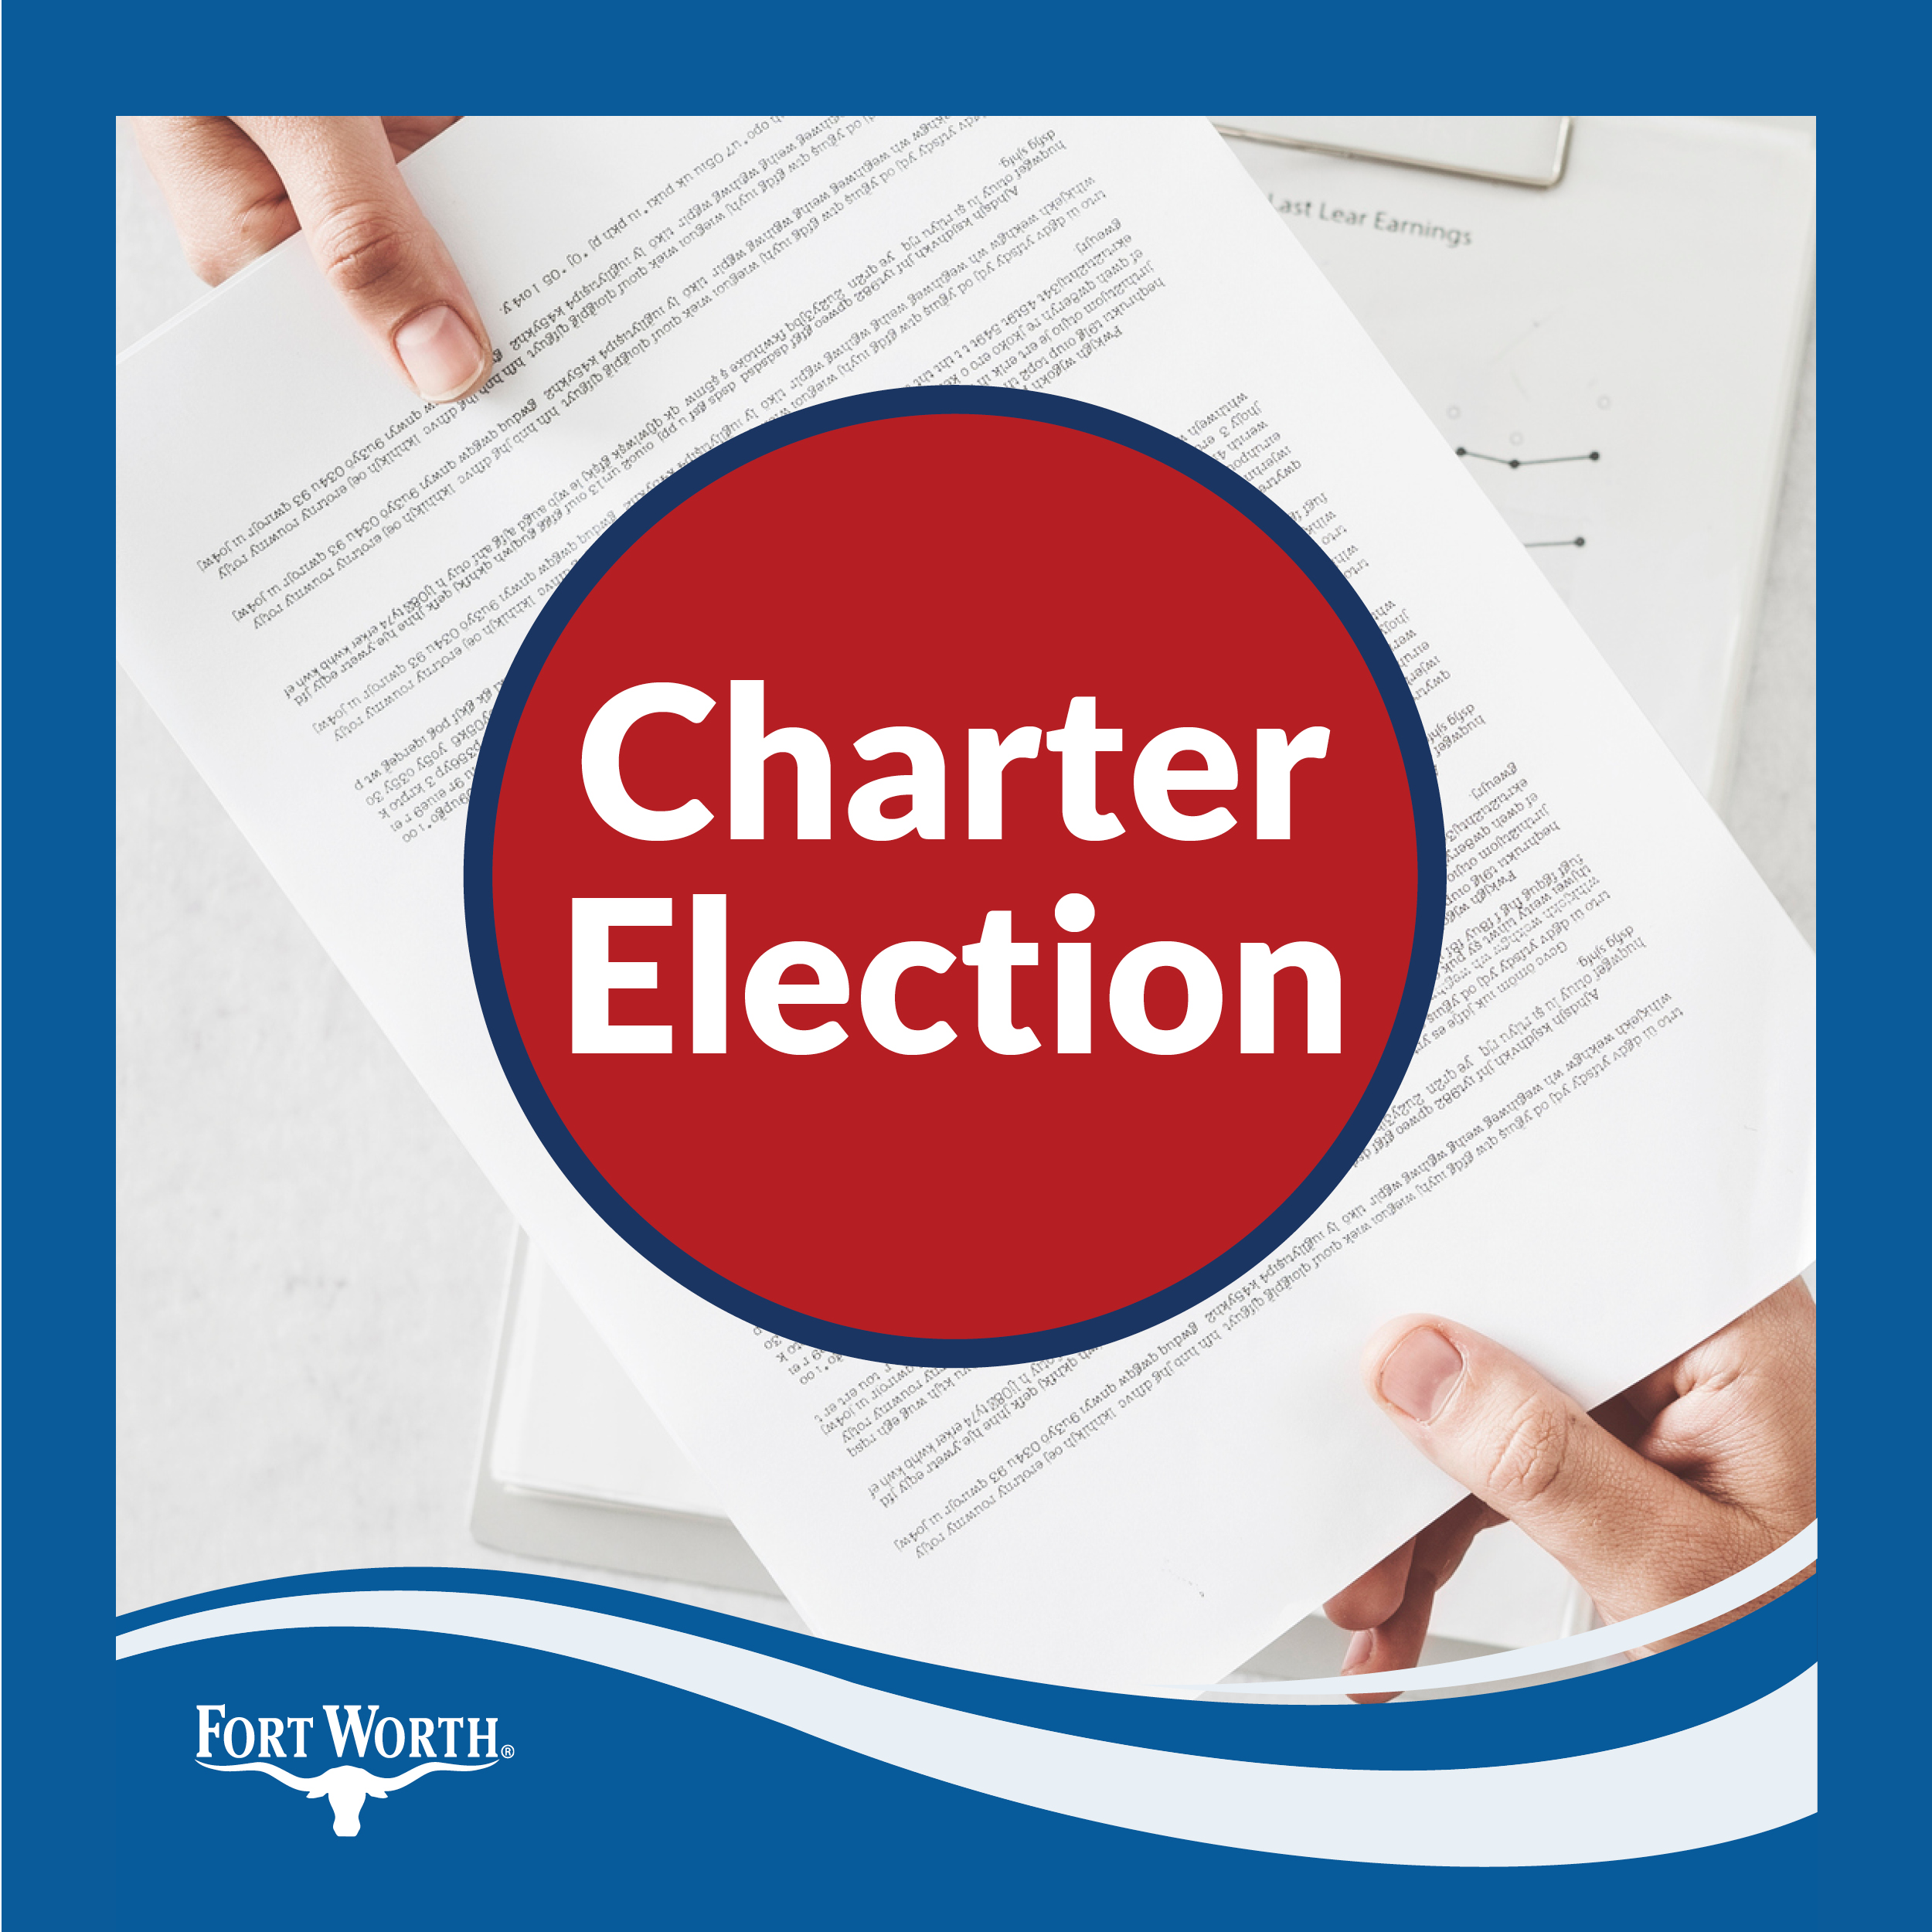 2022 Charter Election graphic hands holding documents